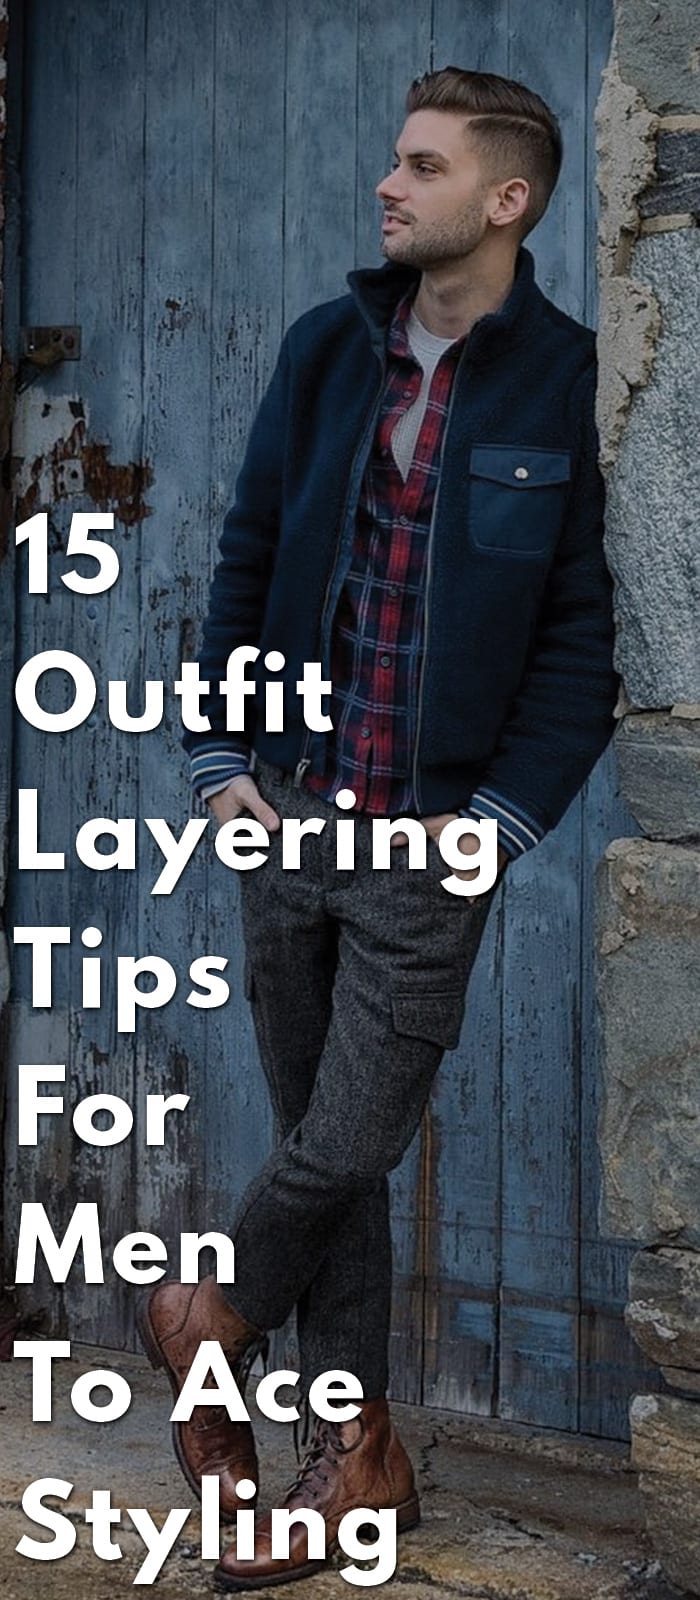 15-Outfit-Layering-Tips-For-Men-To-Ace-Styling....